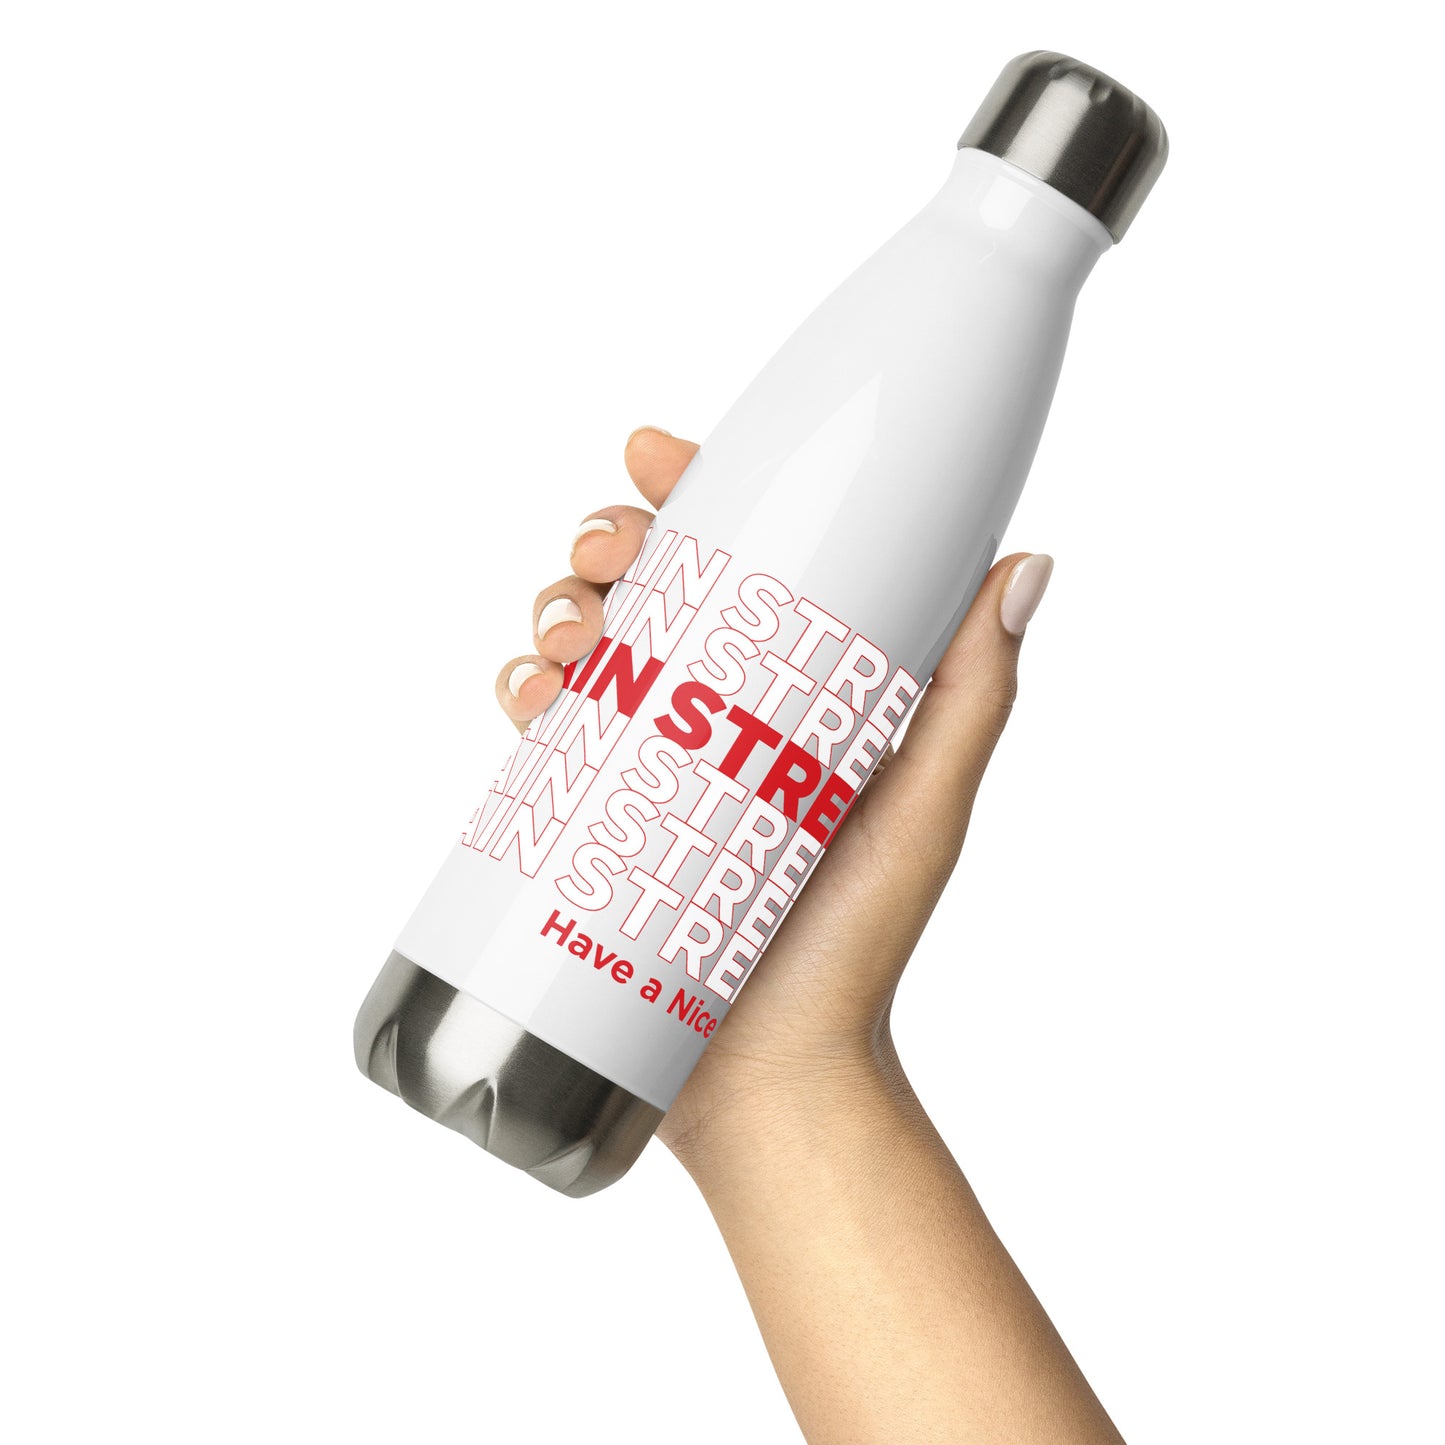 "Have a Nice Day" Stainless Steel Water Bottle